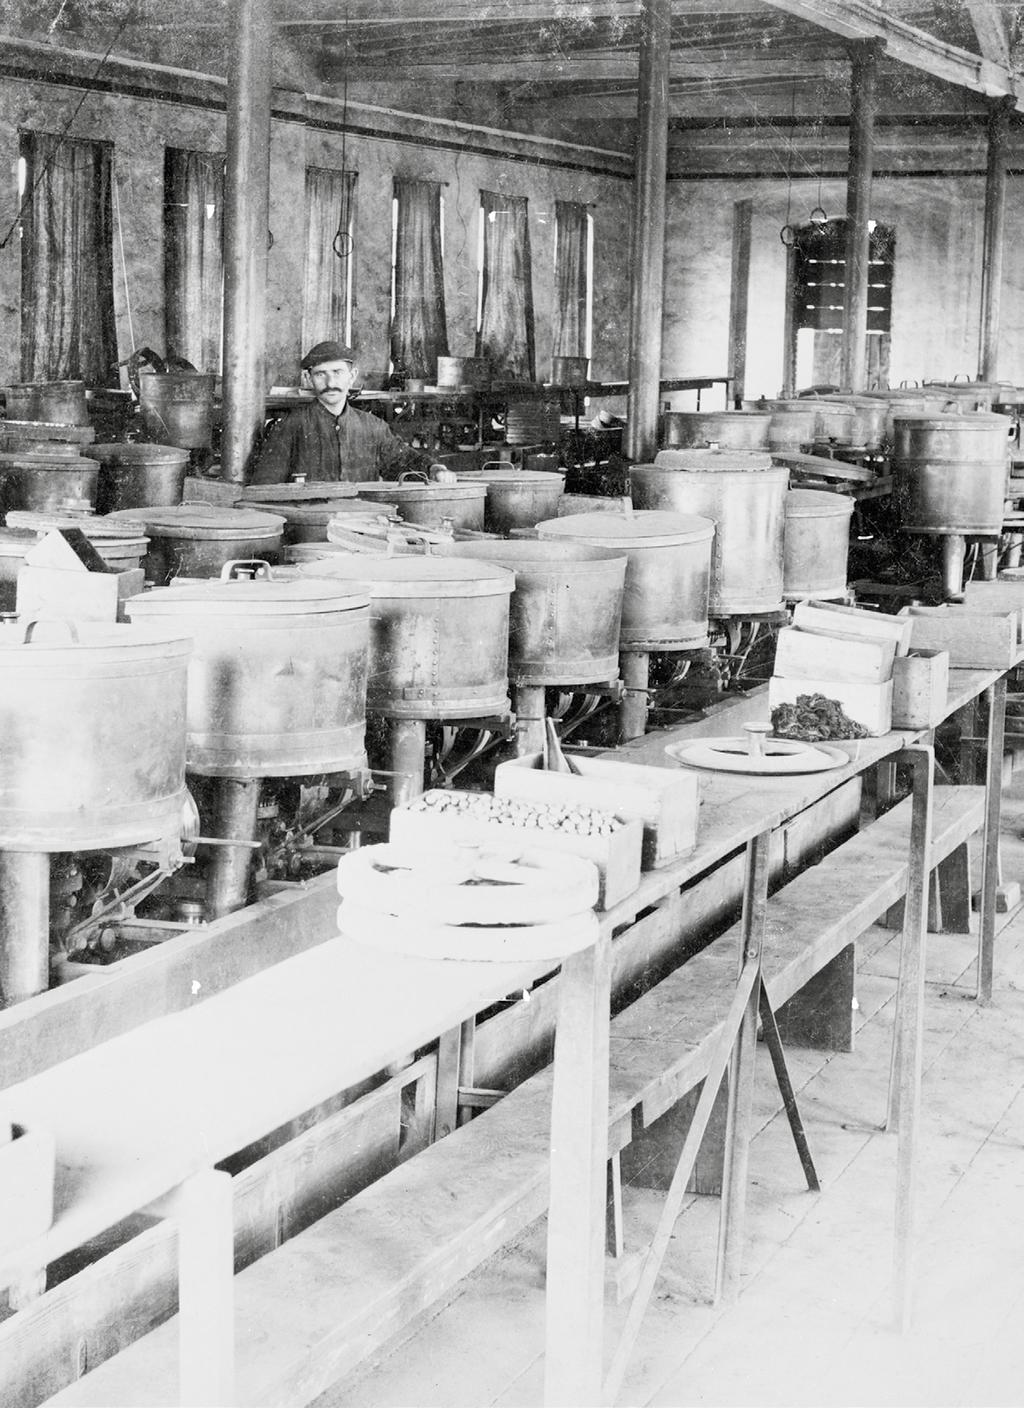 1 History and introduction 1883 Founding year of the company: Friedrich Fischer builds the first ball grinding machine, used to grind hardened steel balls in large batches with absolute spherical